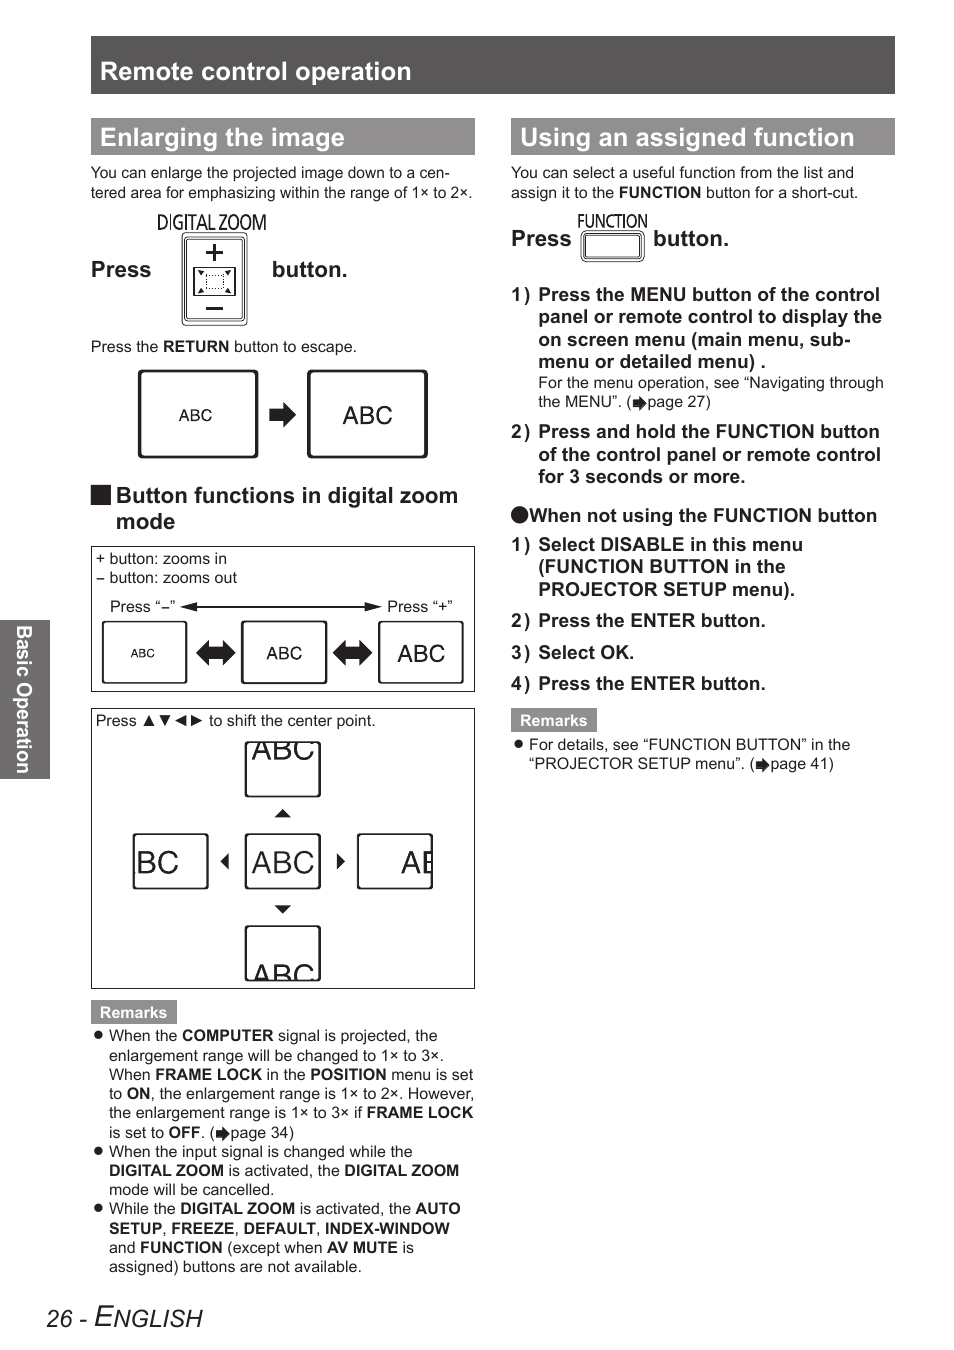 Enlarging the image, Using an assigned function, Enlarging the image using an assigned function | Remote control operation, Nglish, Press button, Button functions in digital zoom mode | Panasonic TQBJ0302 Manuel d'utilisation | Page 26 / 68